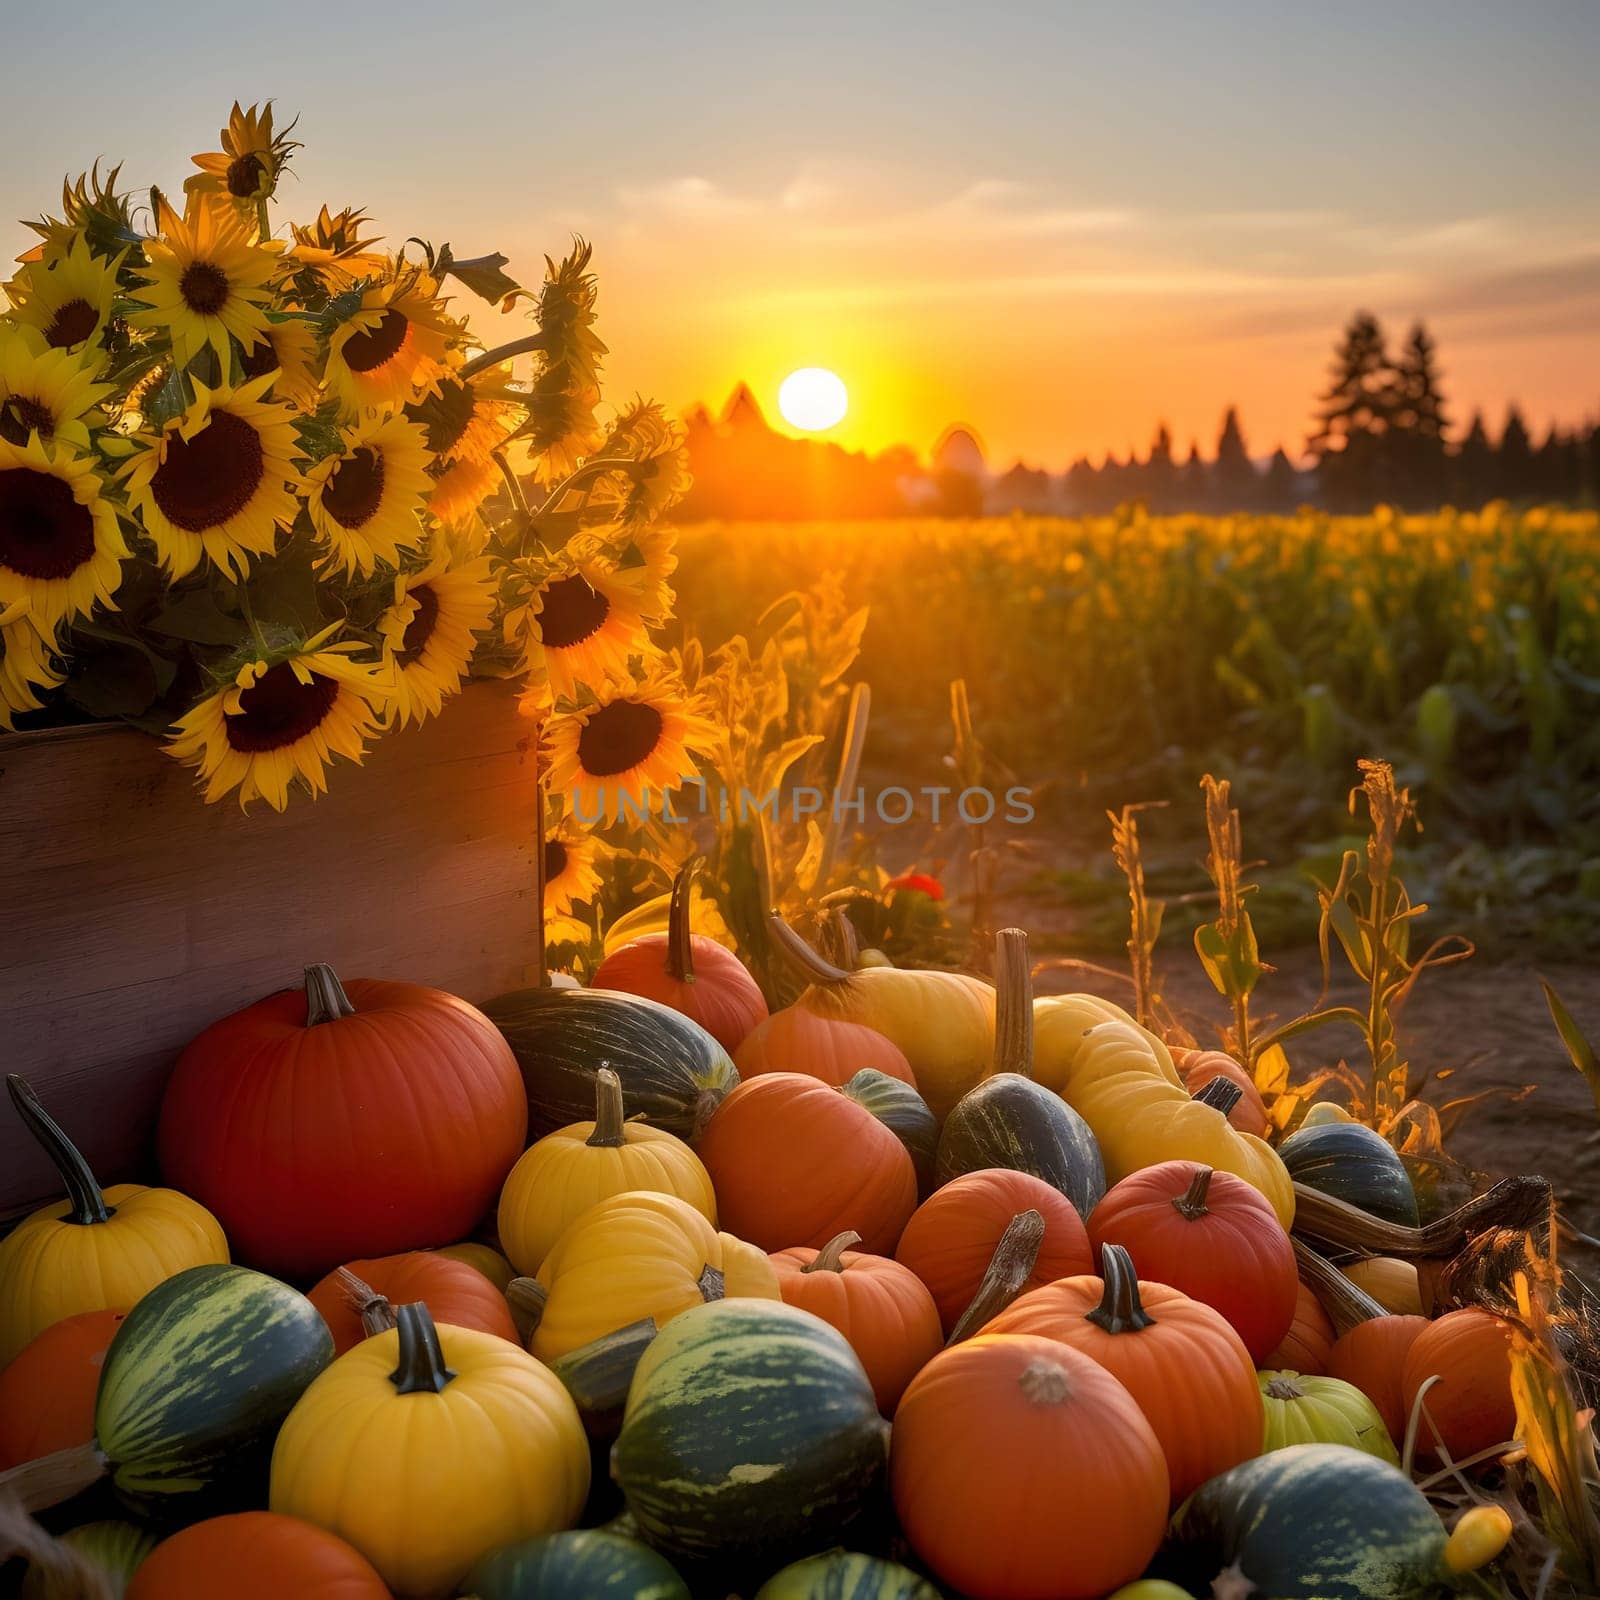 Sunset over the field in the foreground sunflowers and harvested colorful pumpkins. Pumpkin as a dish of thanksgiving for the harvest. An atmosphere of joy and celebration.